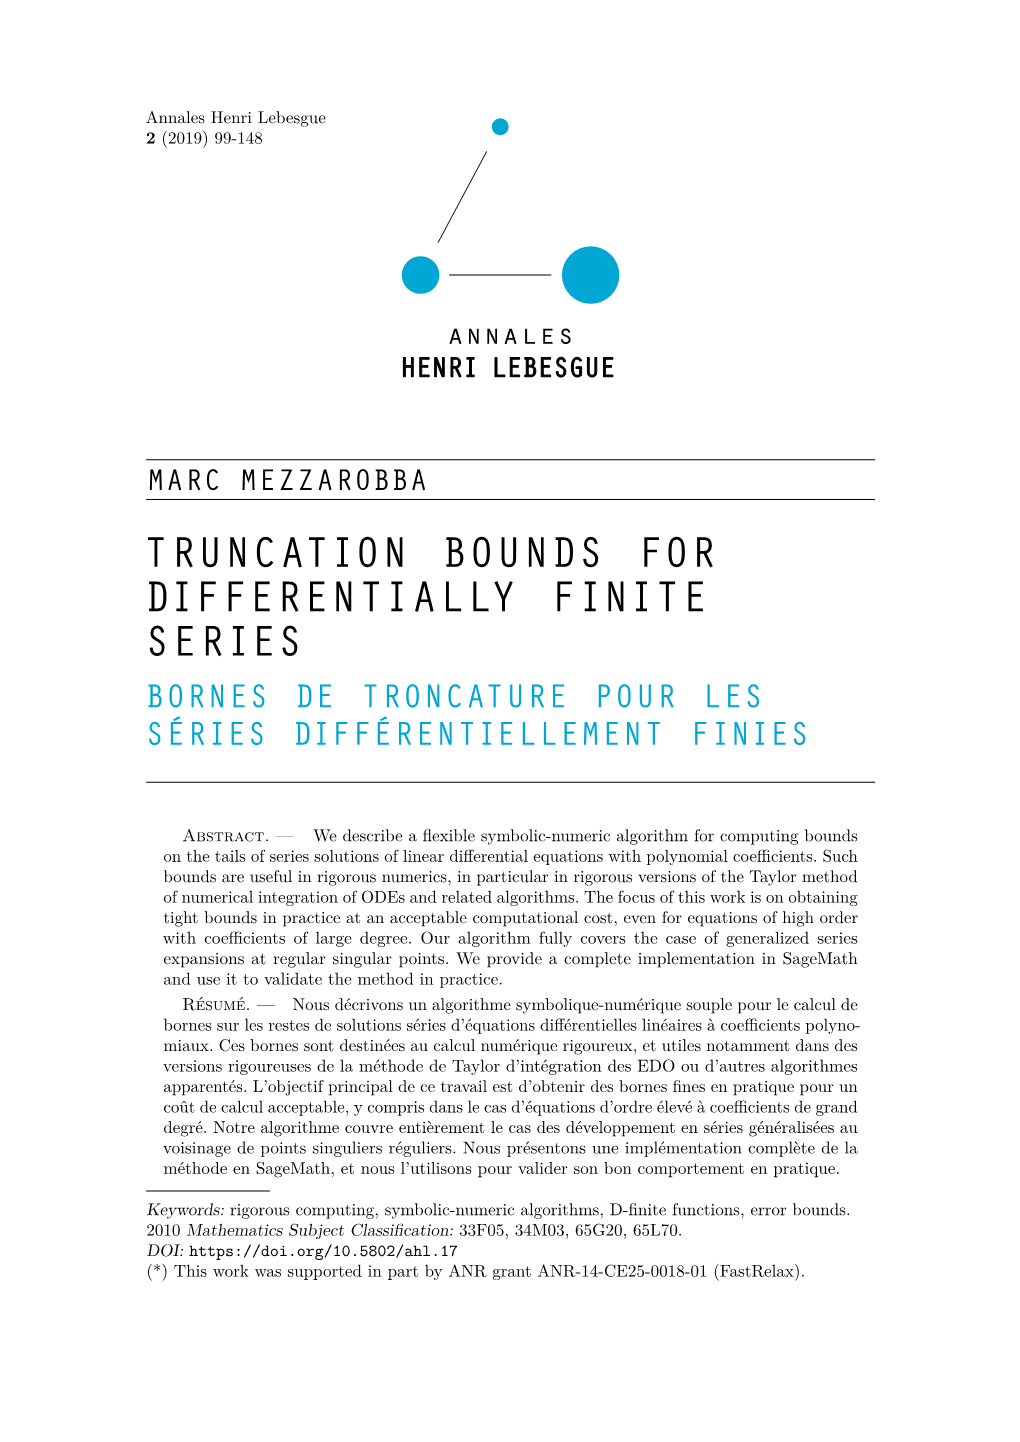 Truncation Bounds for Differentially Finite Series